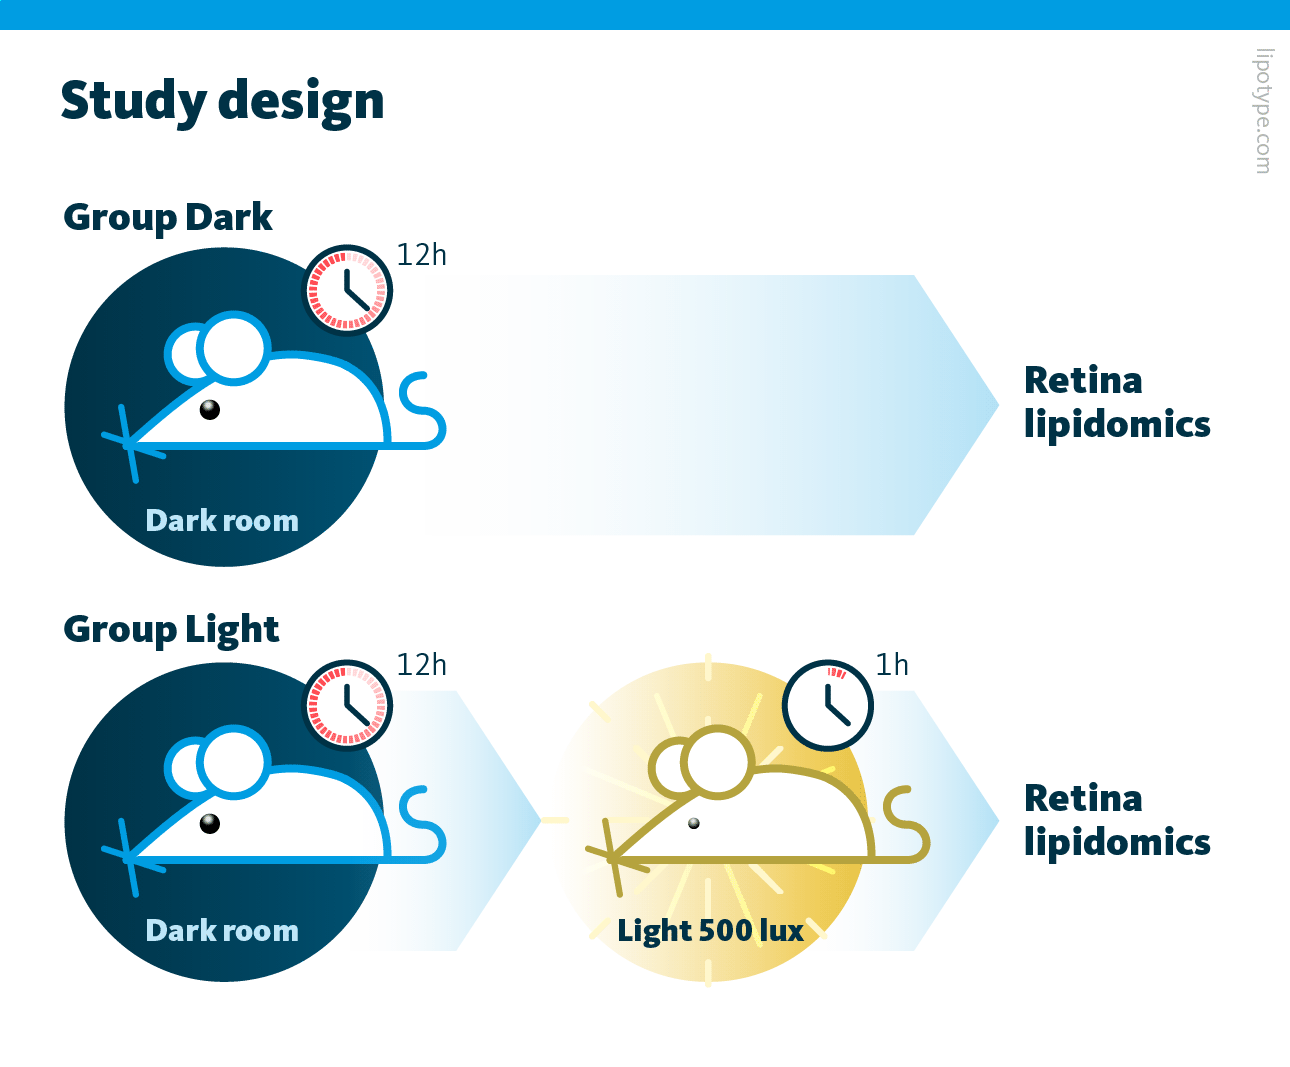 Study design. Mice were kept in the dark for 12h, and then exposed to light of 500 lux for 1h. Further, the lipidomics analysis of rods from the murine retina was performed.